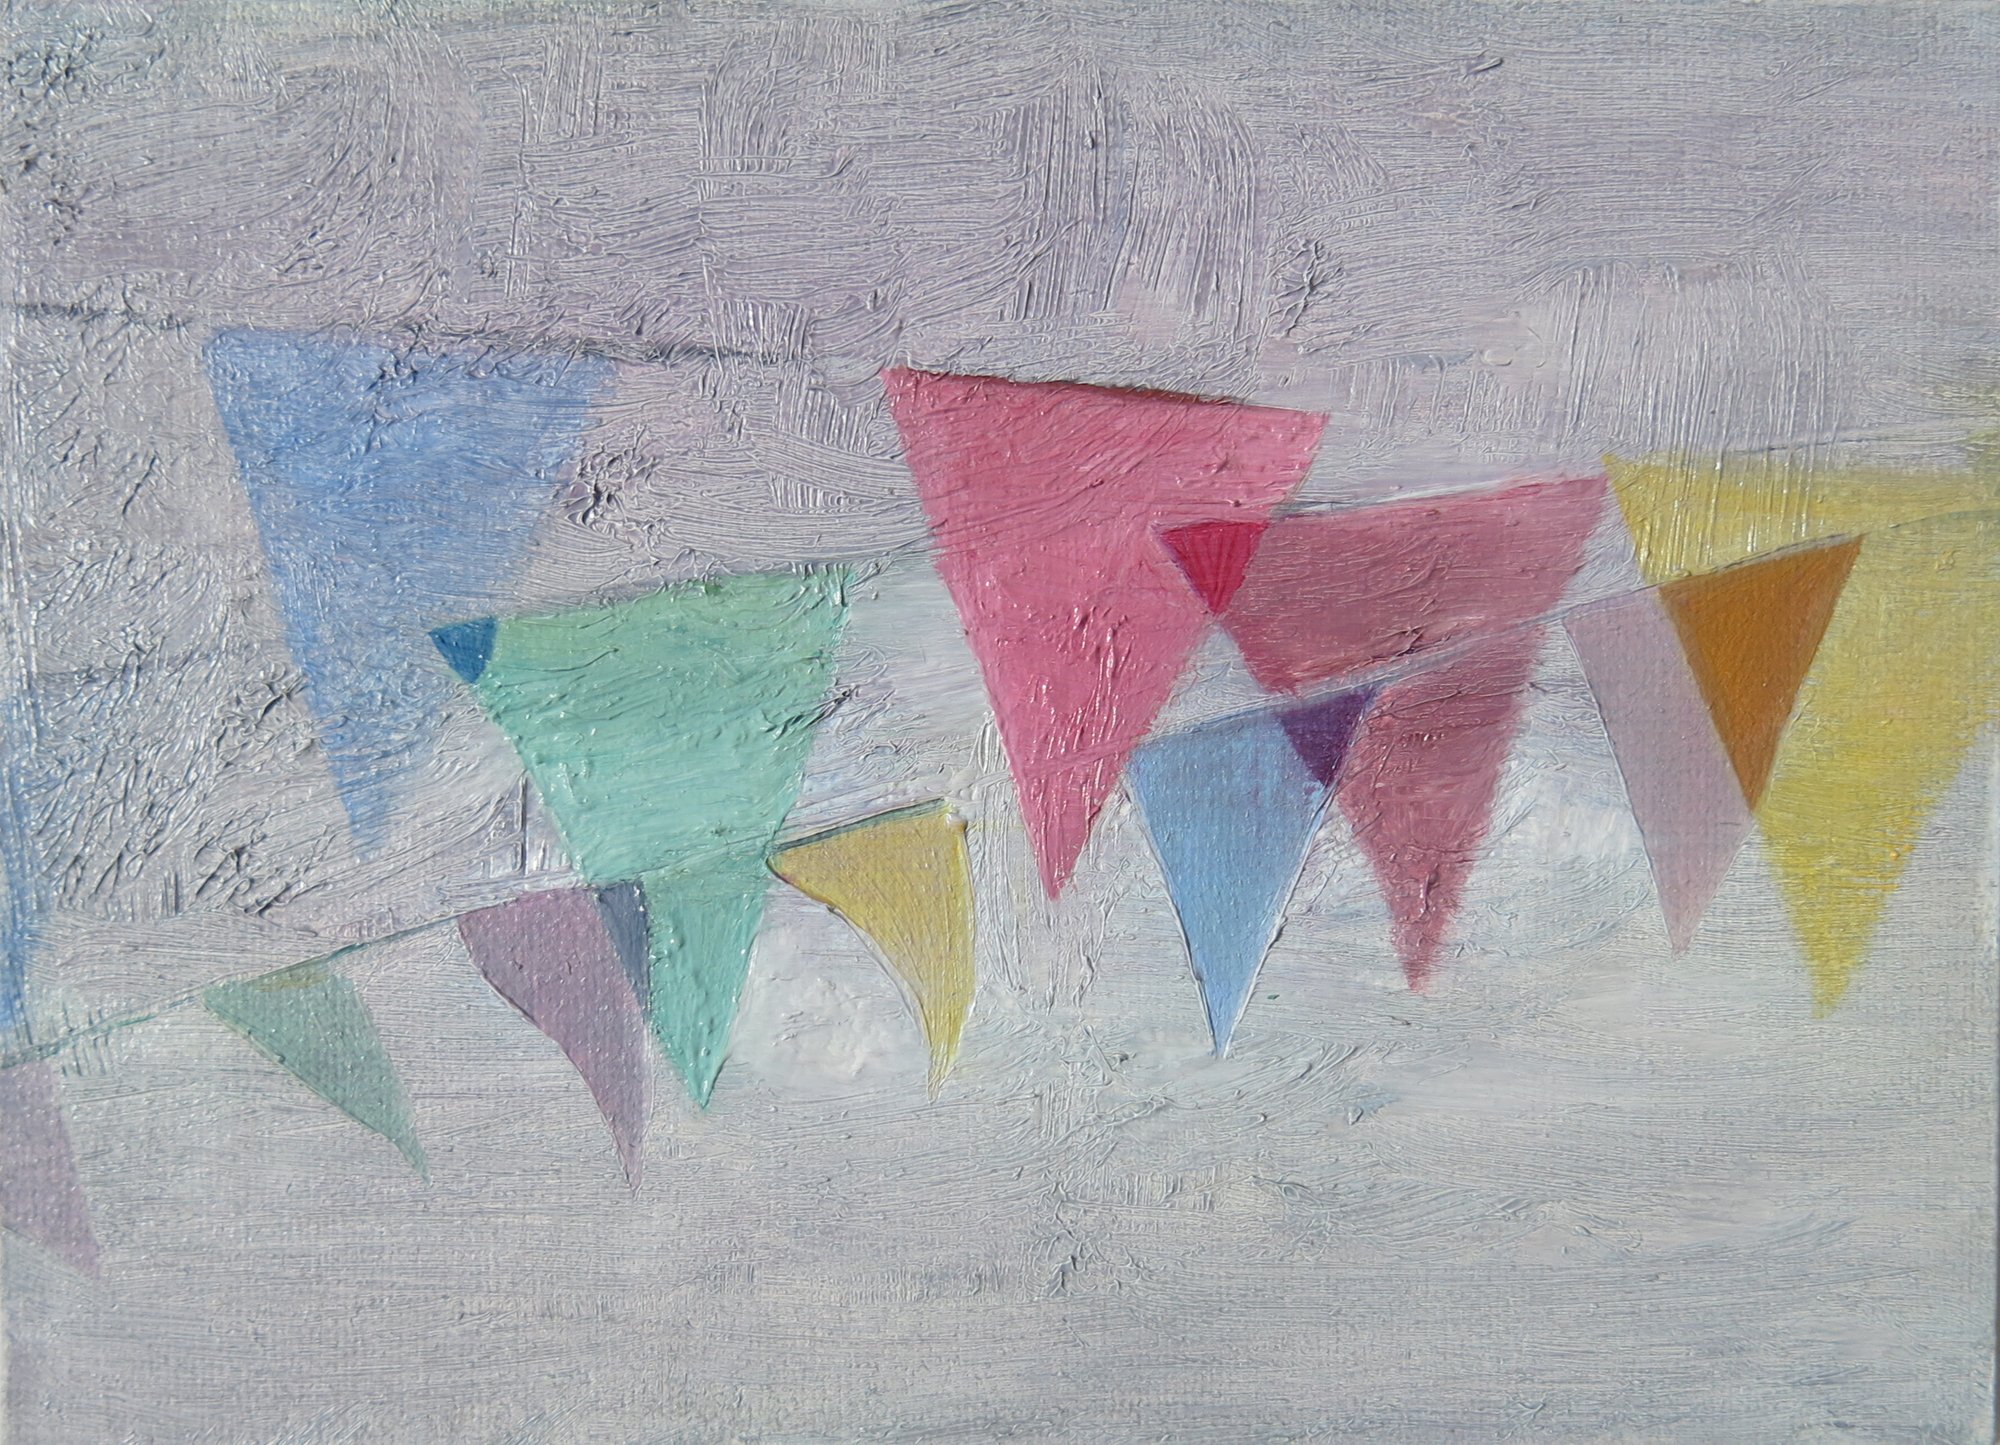   Morning Bunting    2023. oil on canvas board, 13 x 18cm  